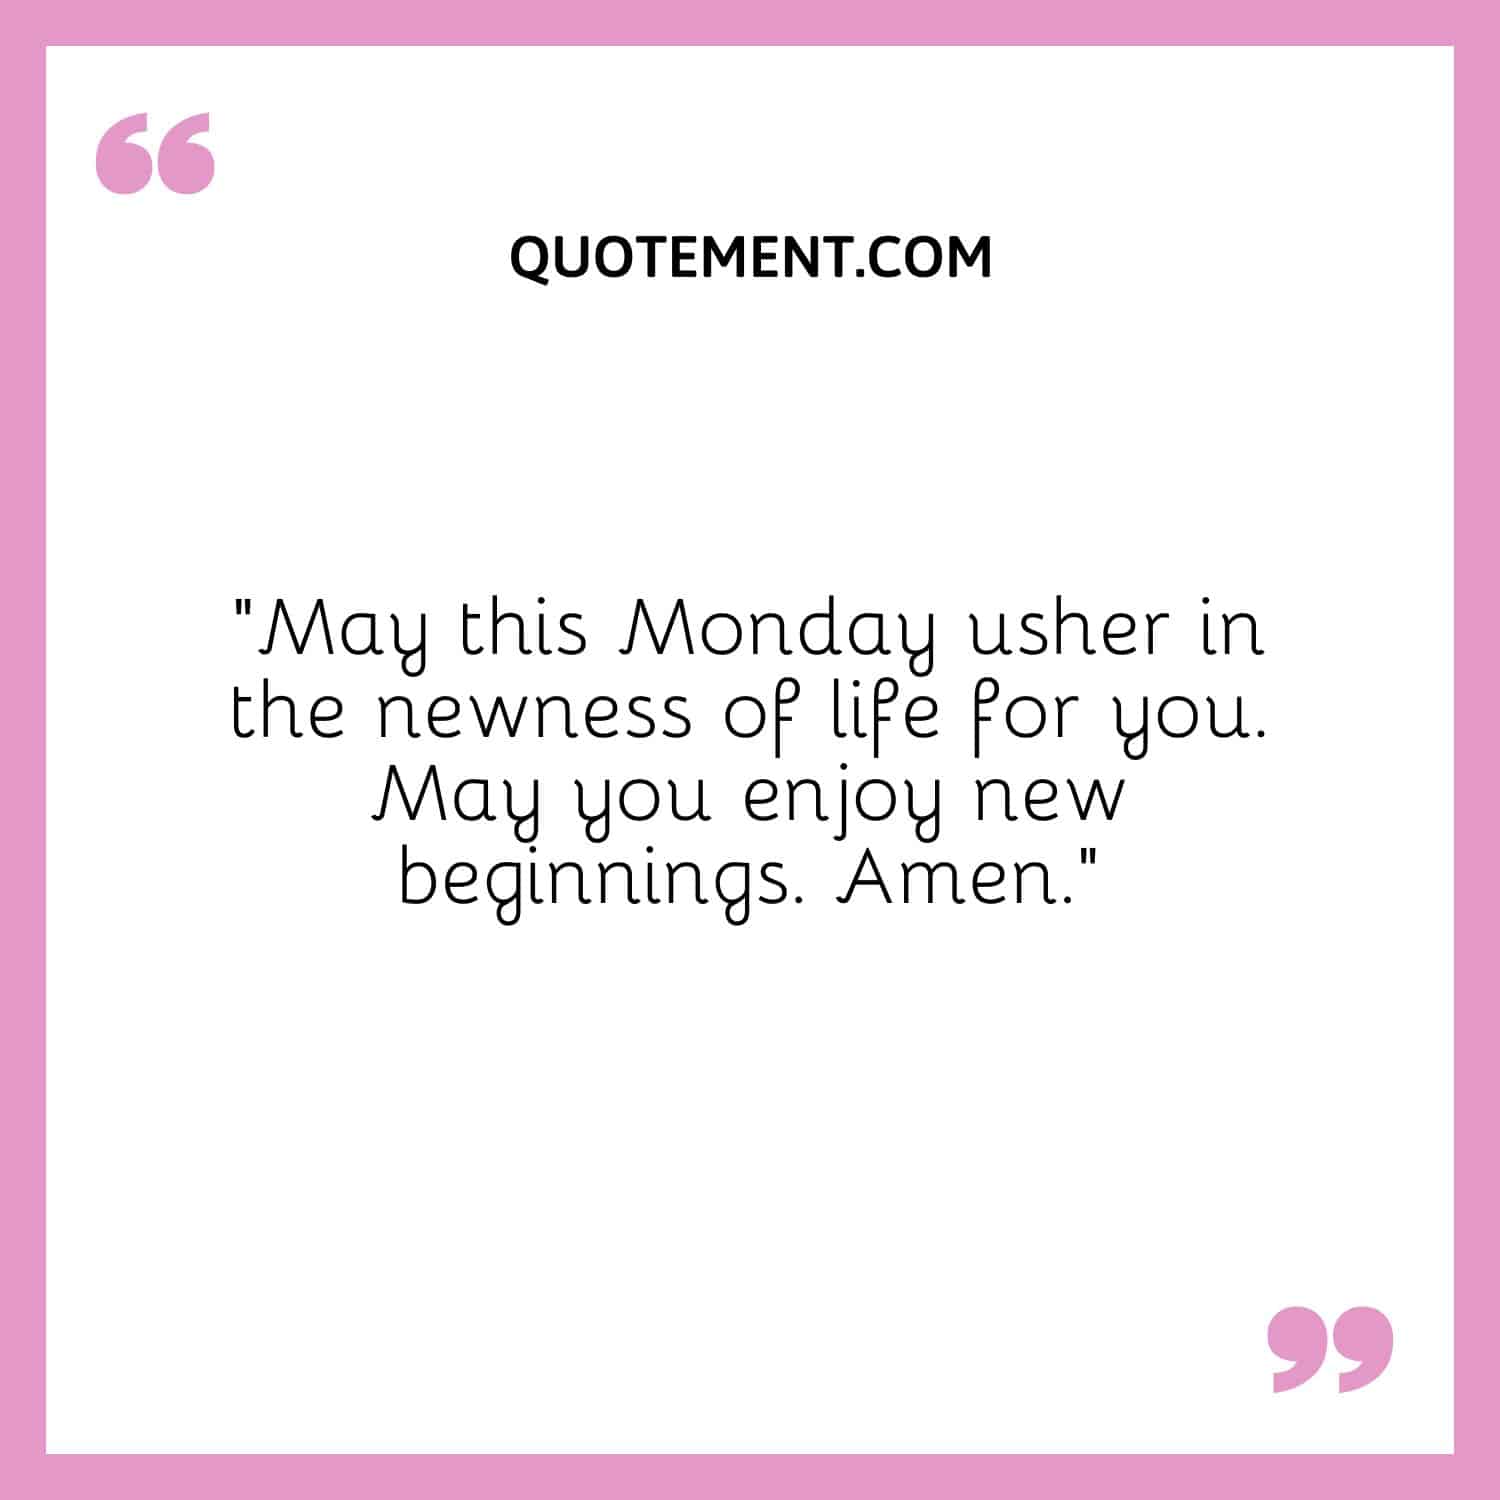 May this Monday usher in tje newness of life for you.